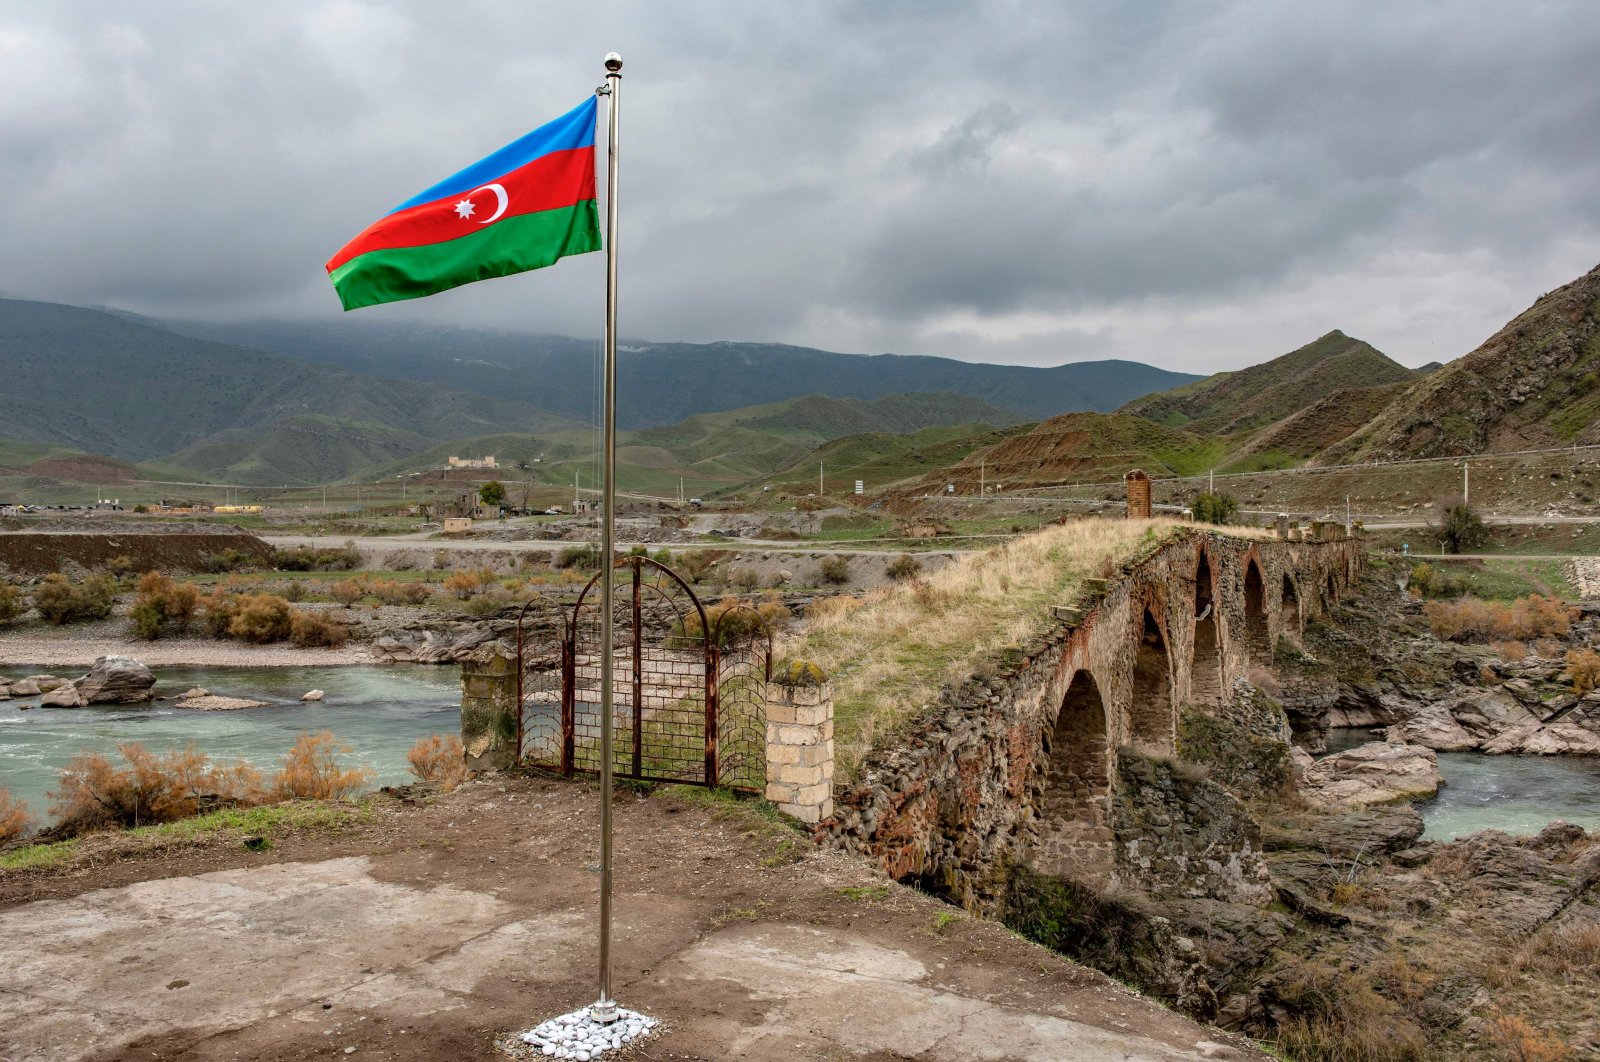 An Azerbaijani national flag flies next to the medieval Khudaferin bridge in Jebrayil district at the country's border with Iran, Azerbaijan, Dec. 9, 2020. (AFP Photo)